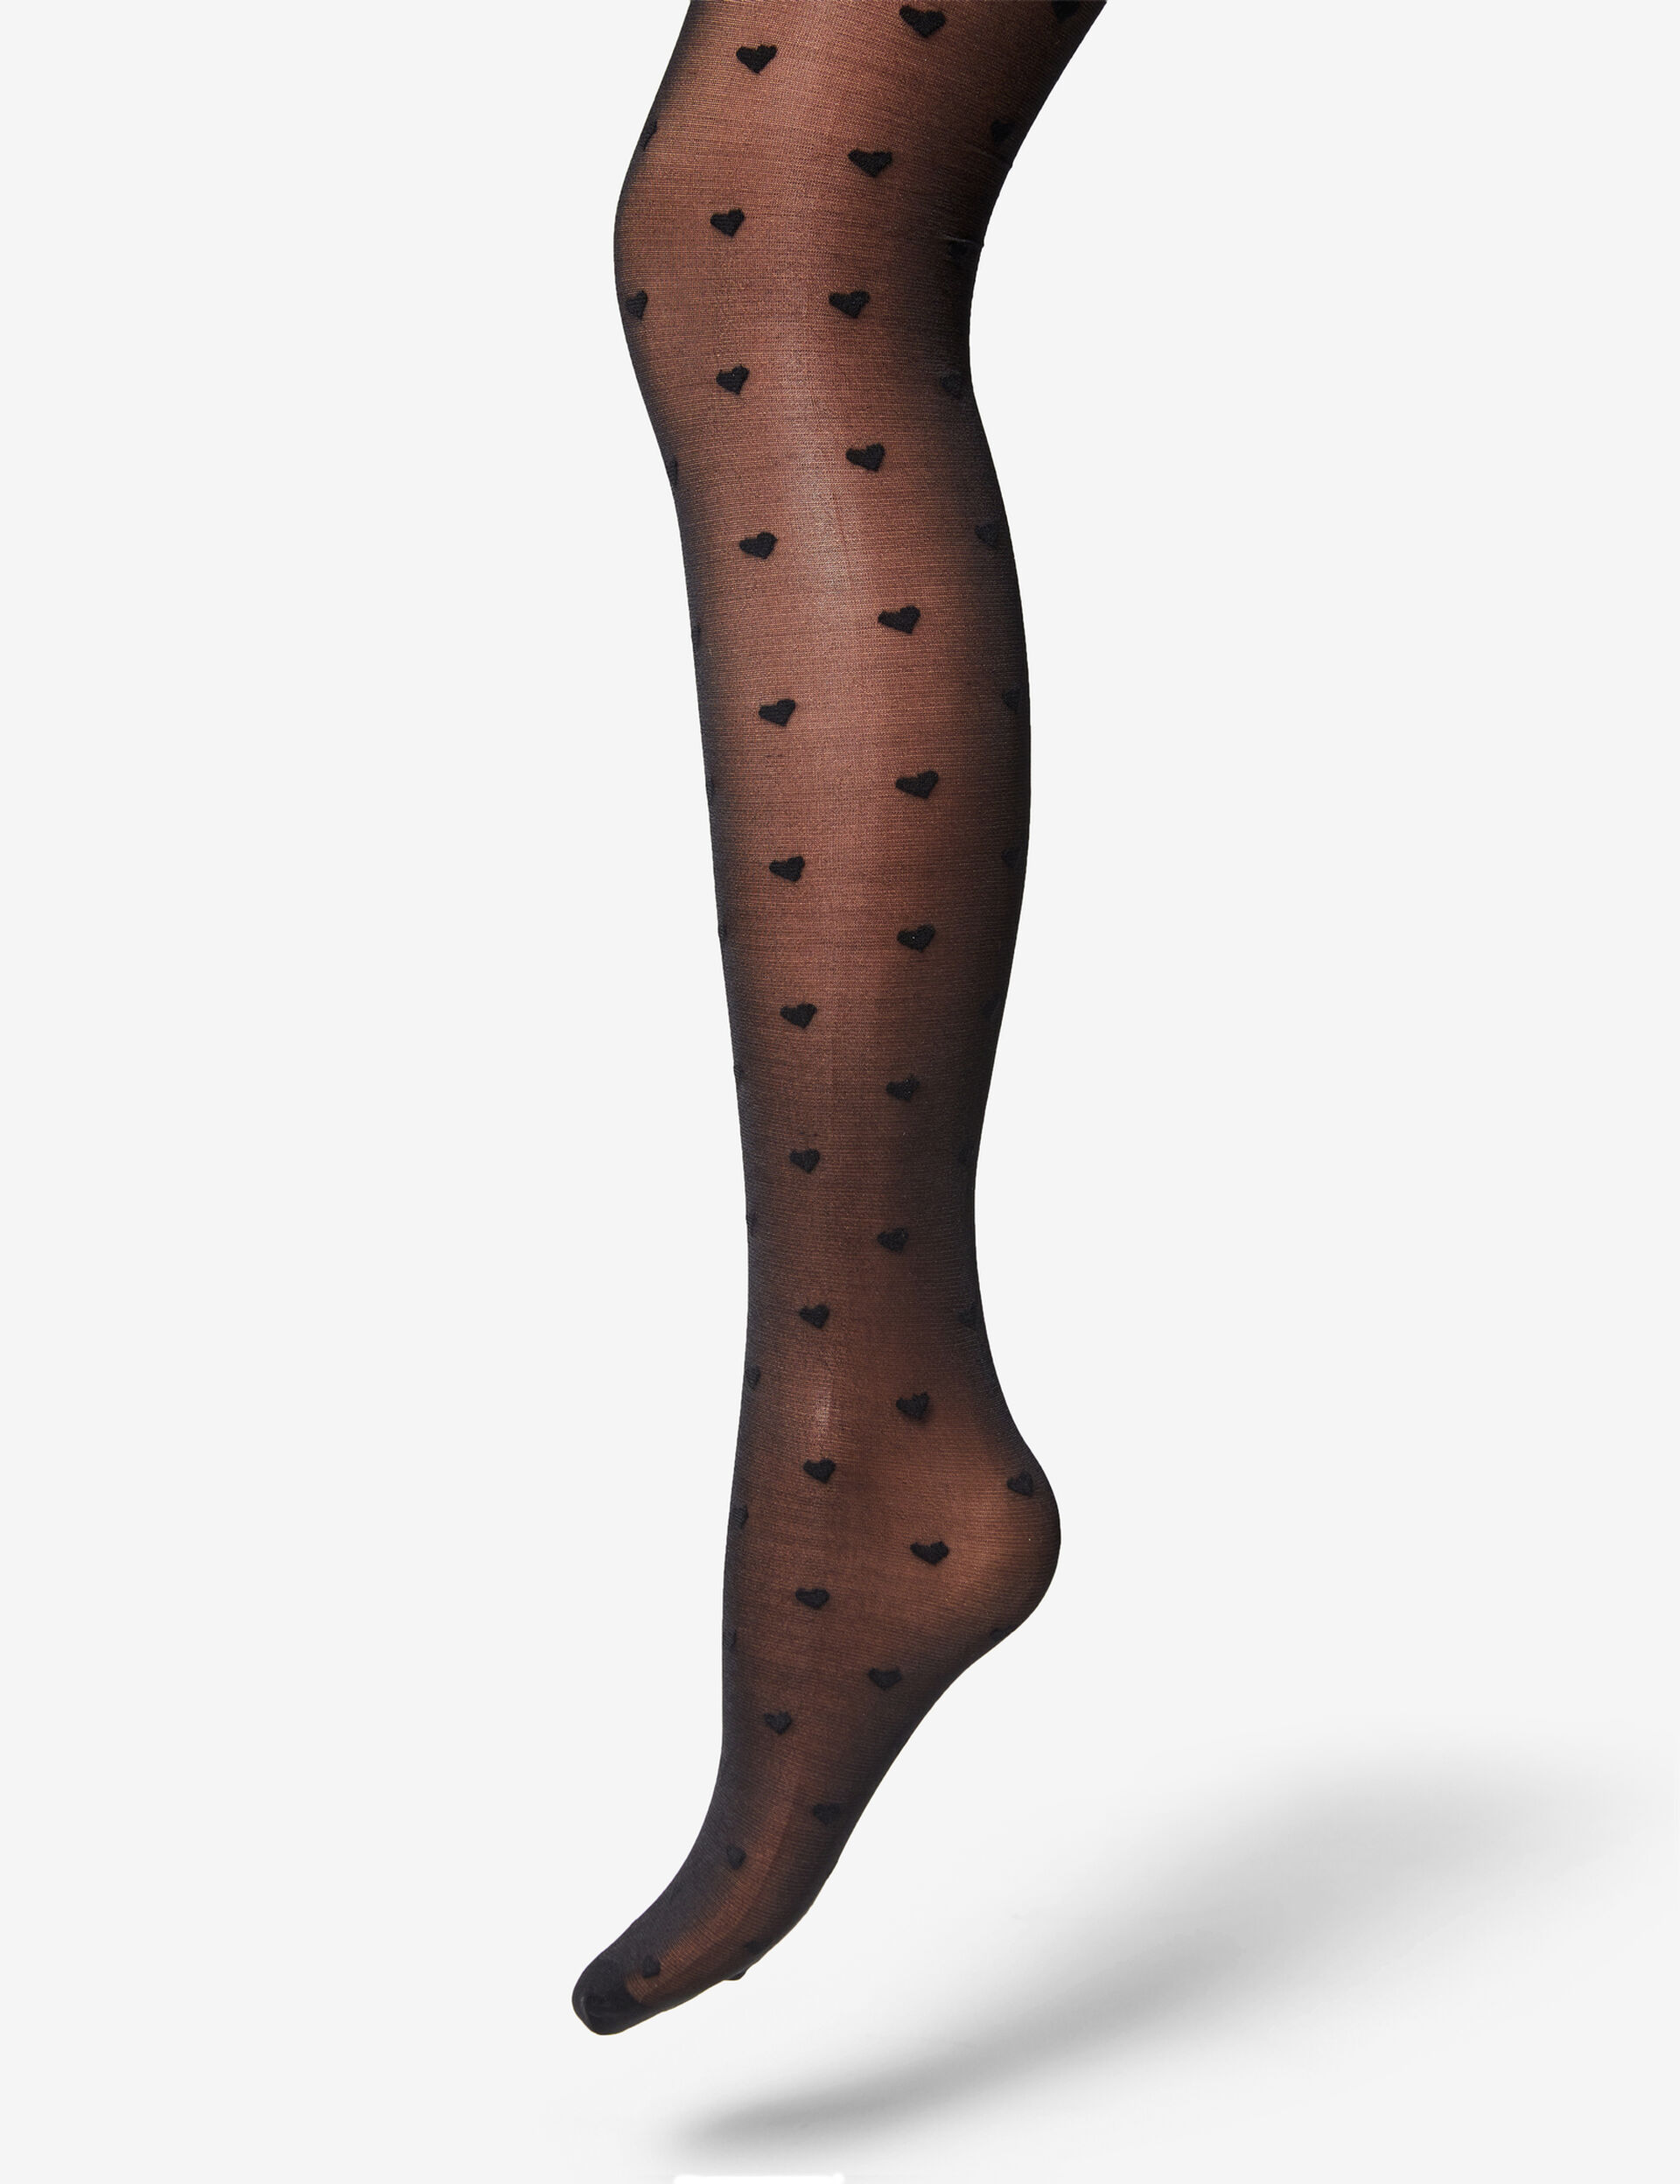 Patterned tights